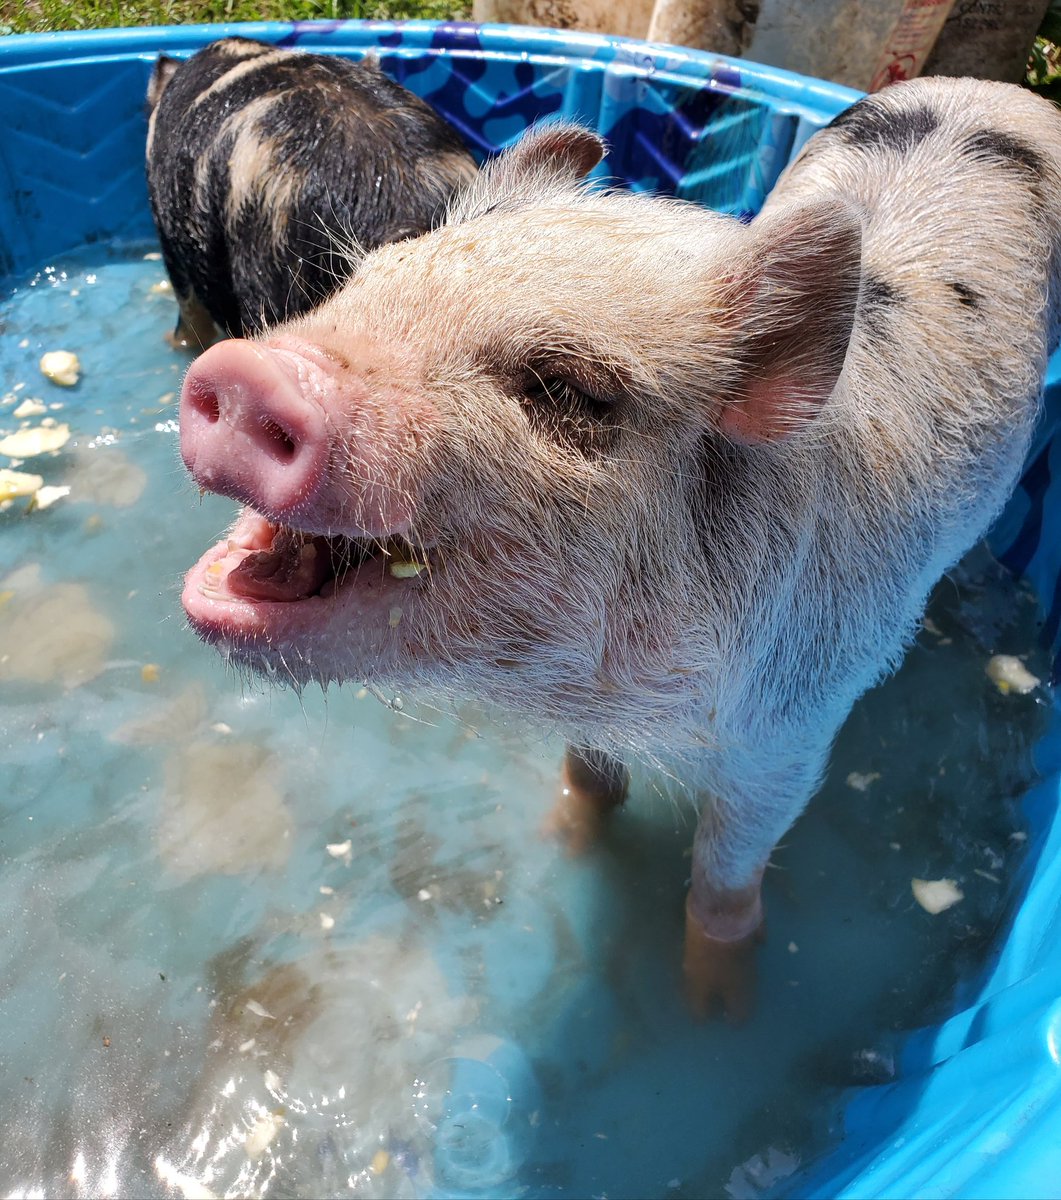 They were bobbing for apples and I'm not sure I've ever seen a happier pig.